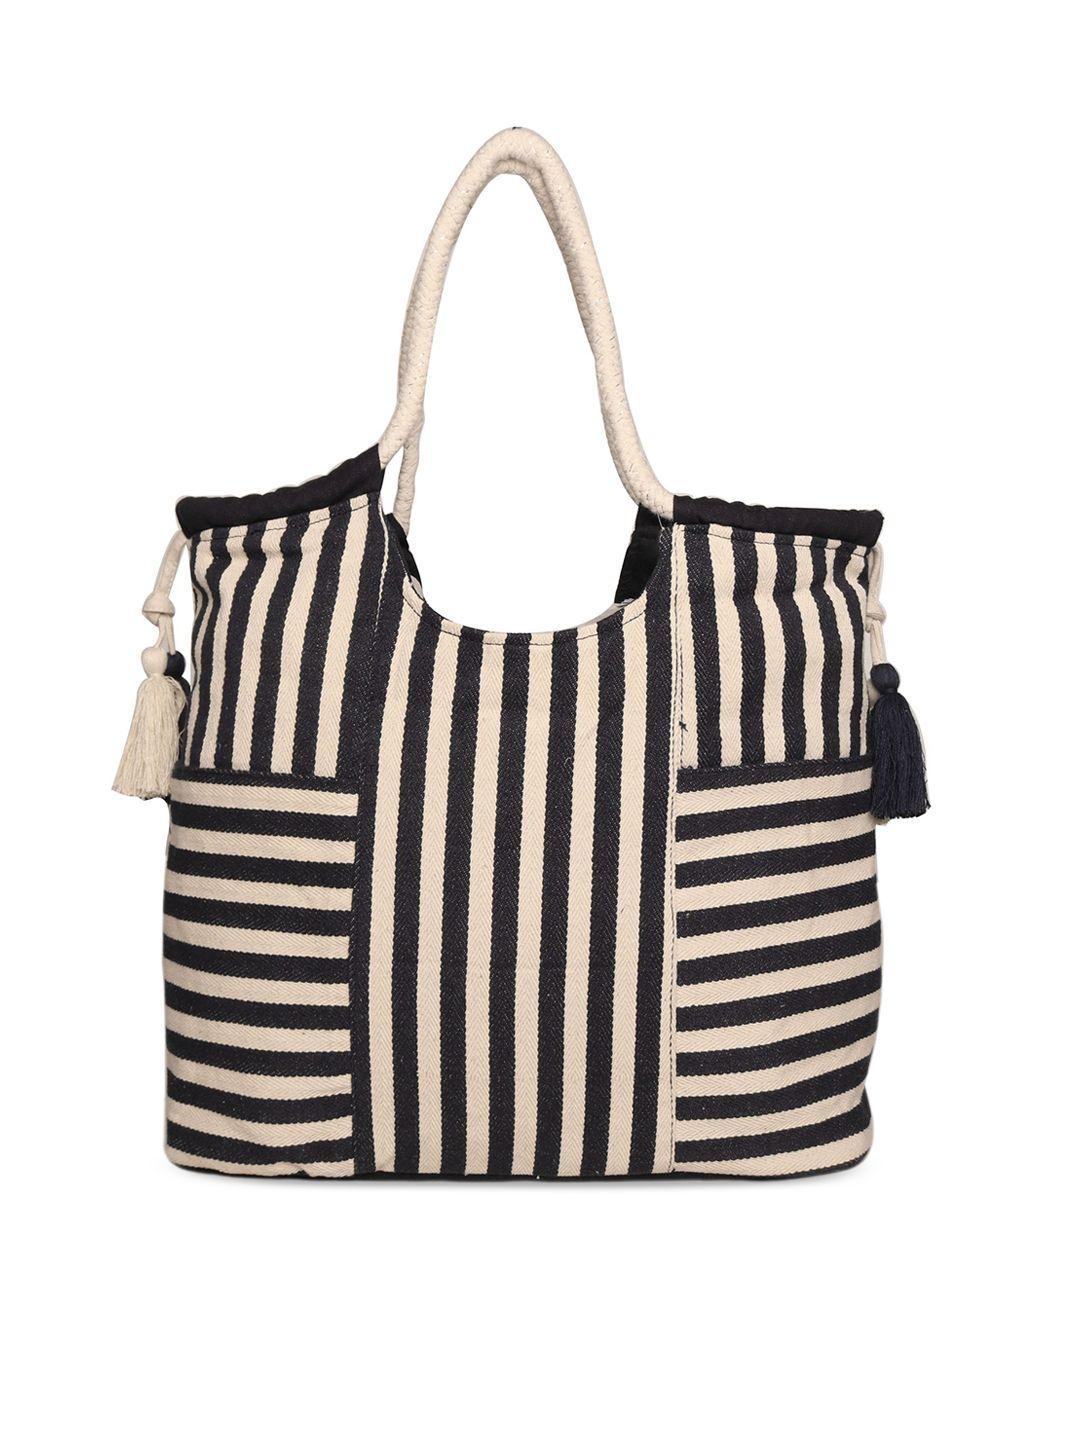 astrid striped oversized shopper tote bag with tasselled